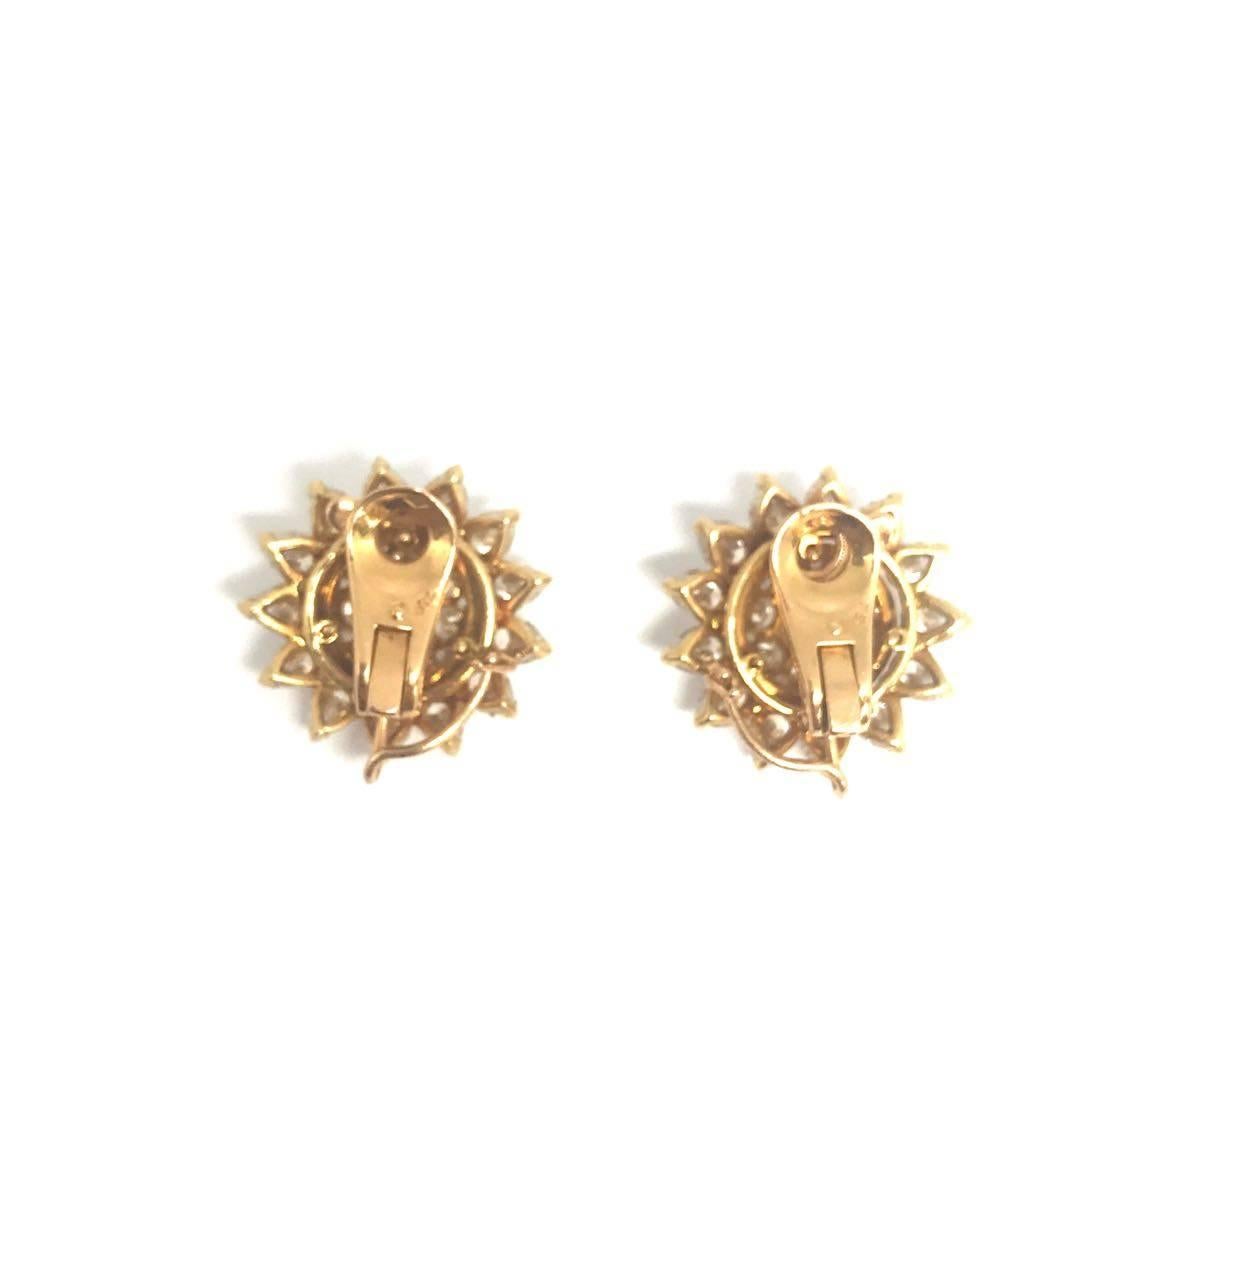 Ready to shine ? 
These sunflower ear clips are the perfect addition to any outfit , day or night. 
Sophisticated and elegant the jewels are made in 18 k yellow gold and diamond ( ~9ct) by Cartier in France. Signed and numbered. 